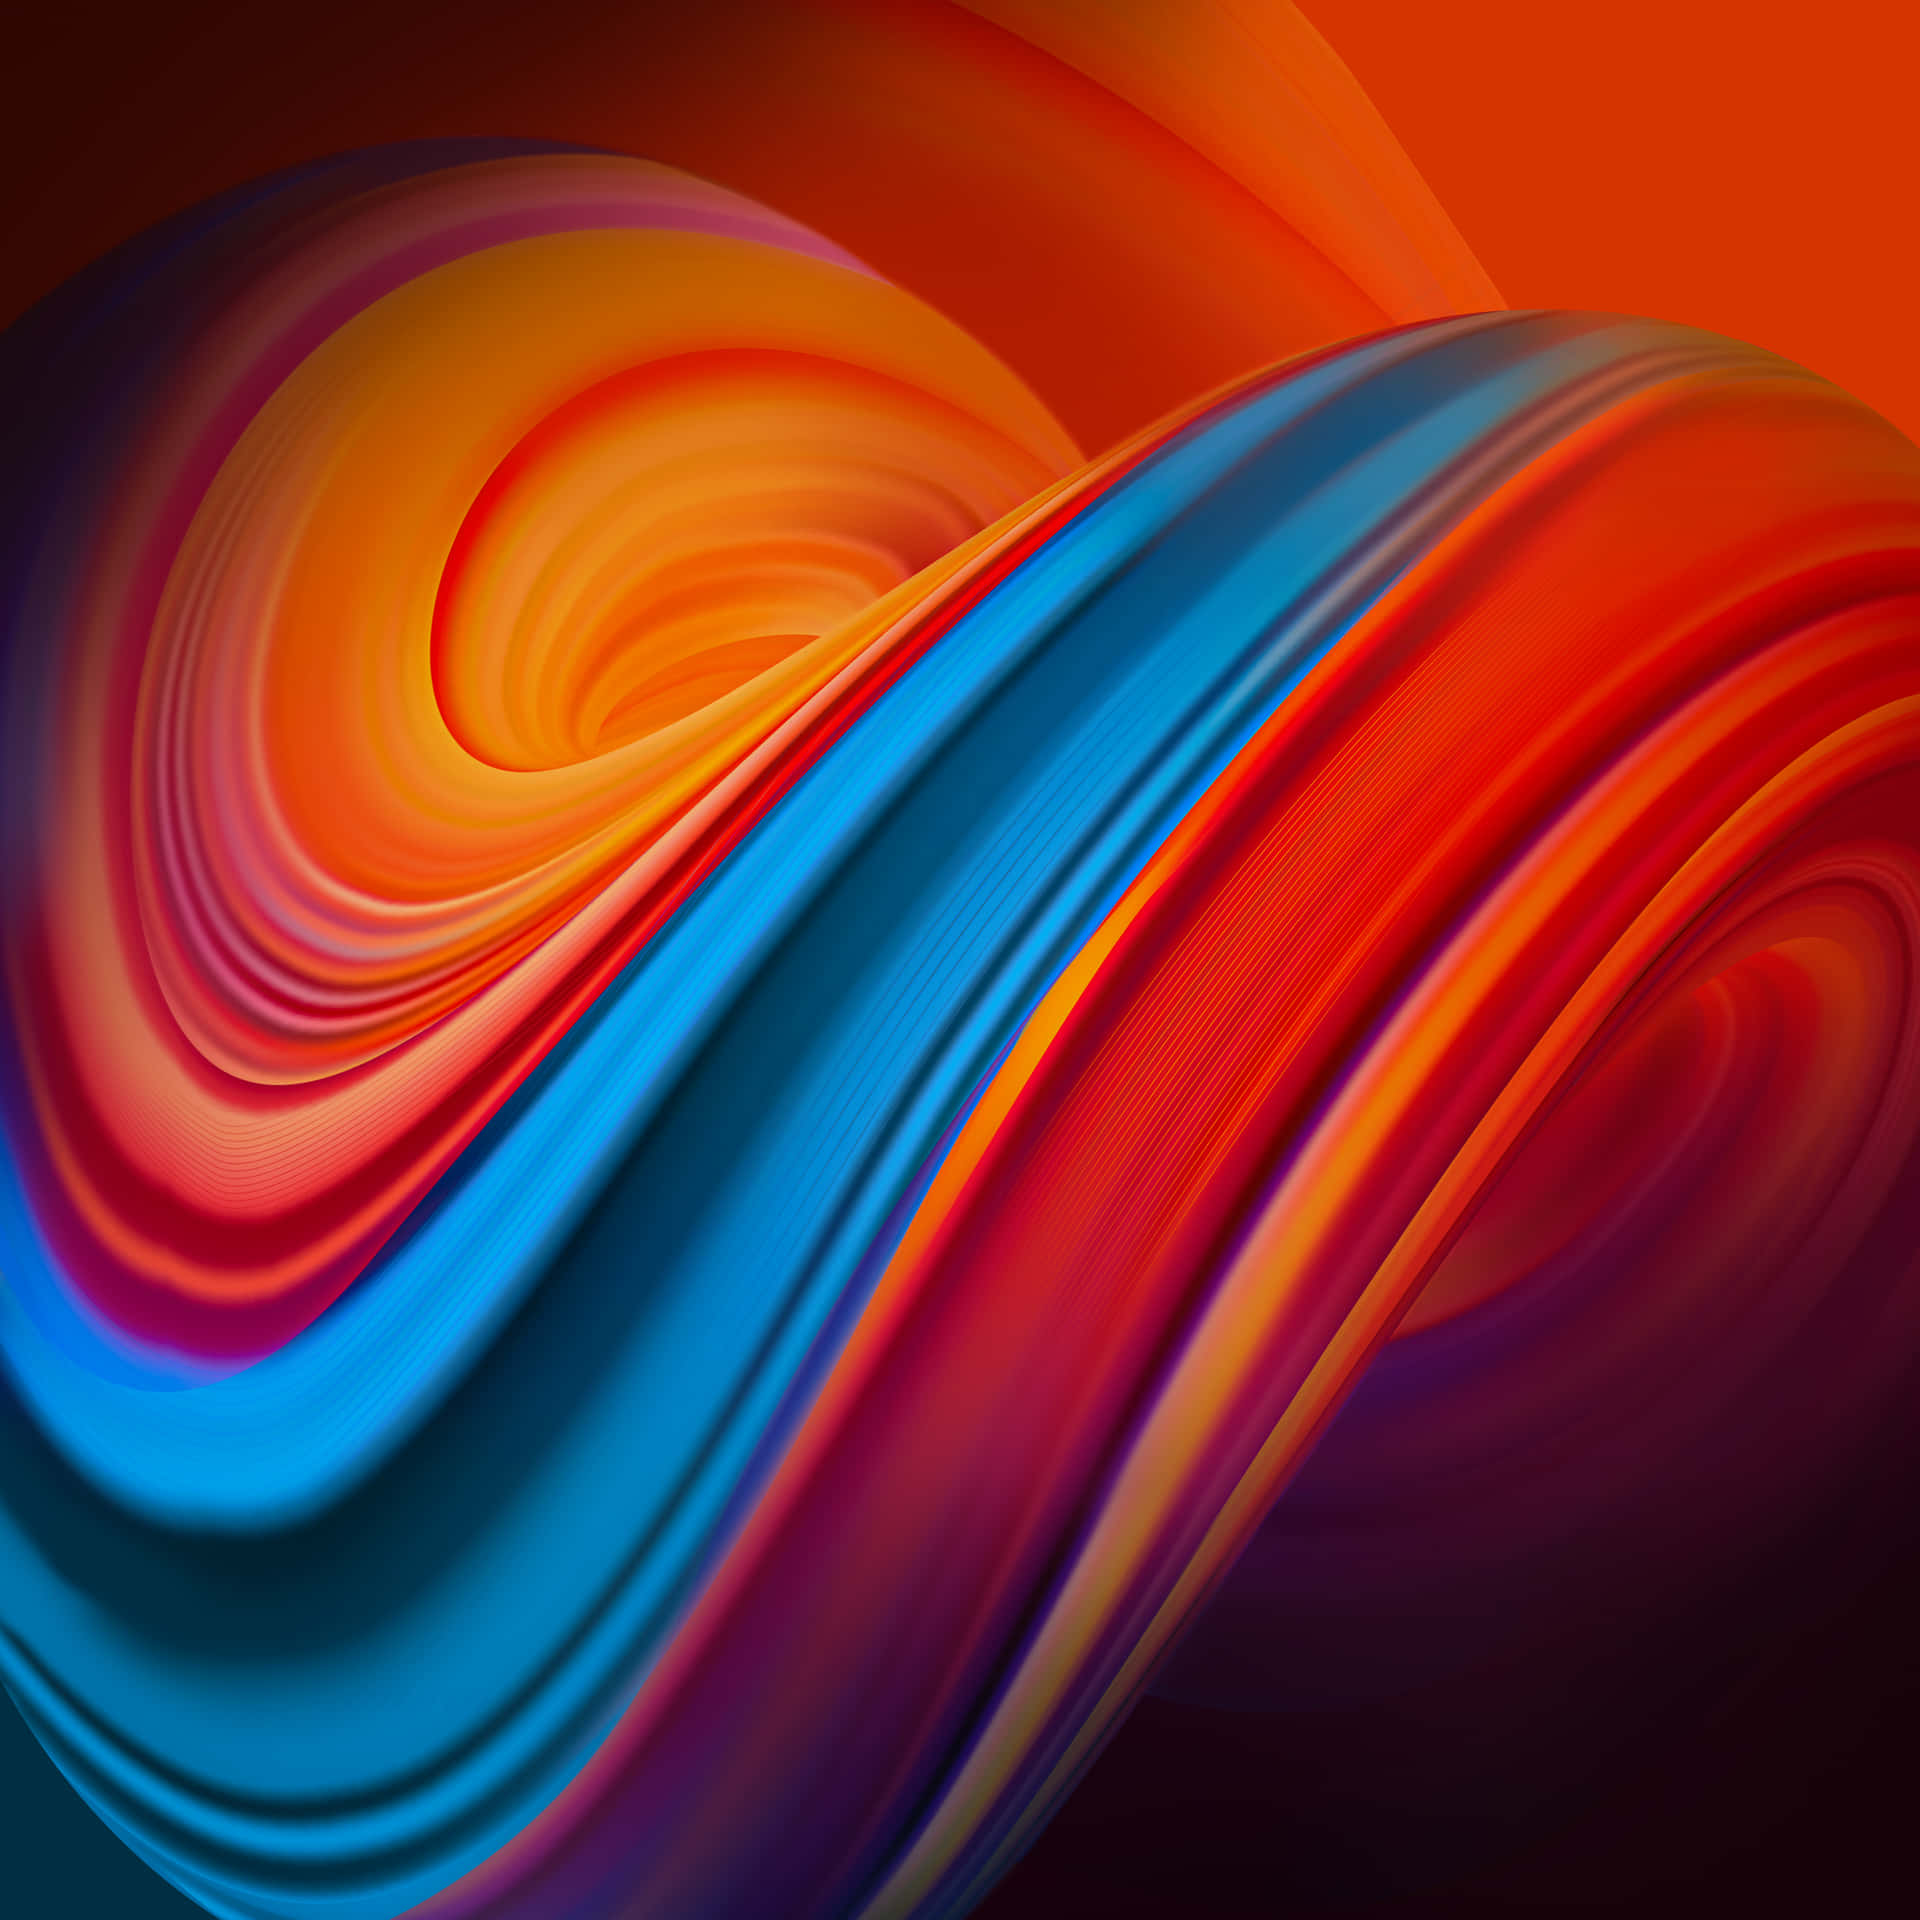 An Abstract Swirling Background With Colors